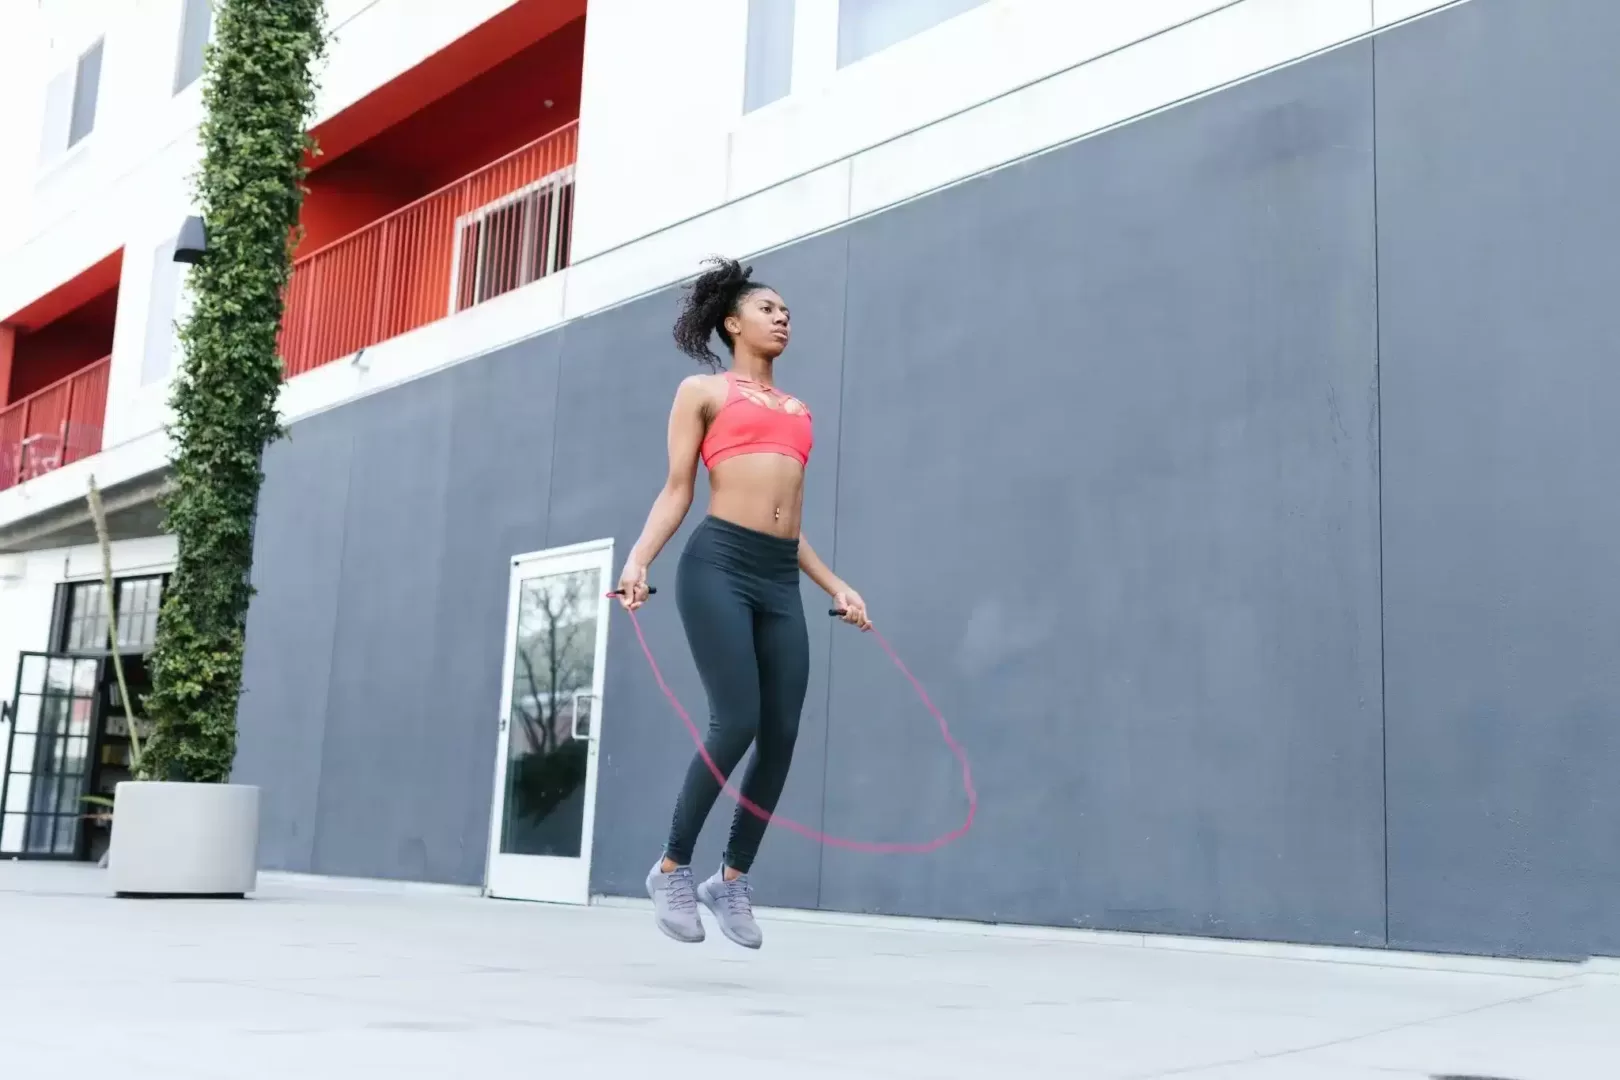 Fitness Exercise - jumping - rope skipping - loose the weight - How to Get in Shape